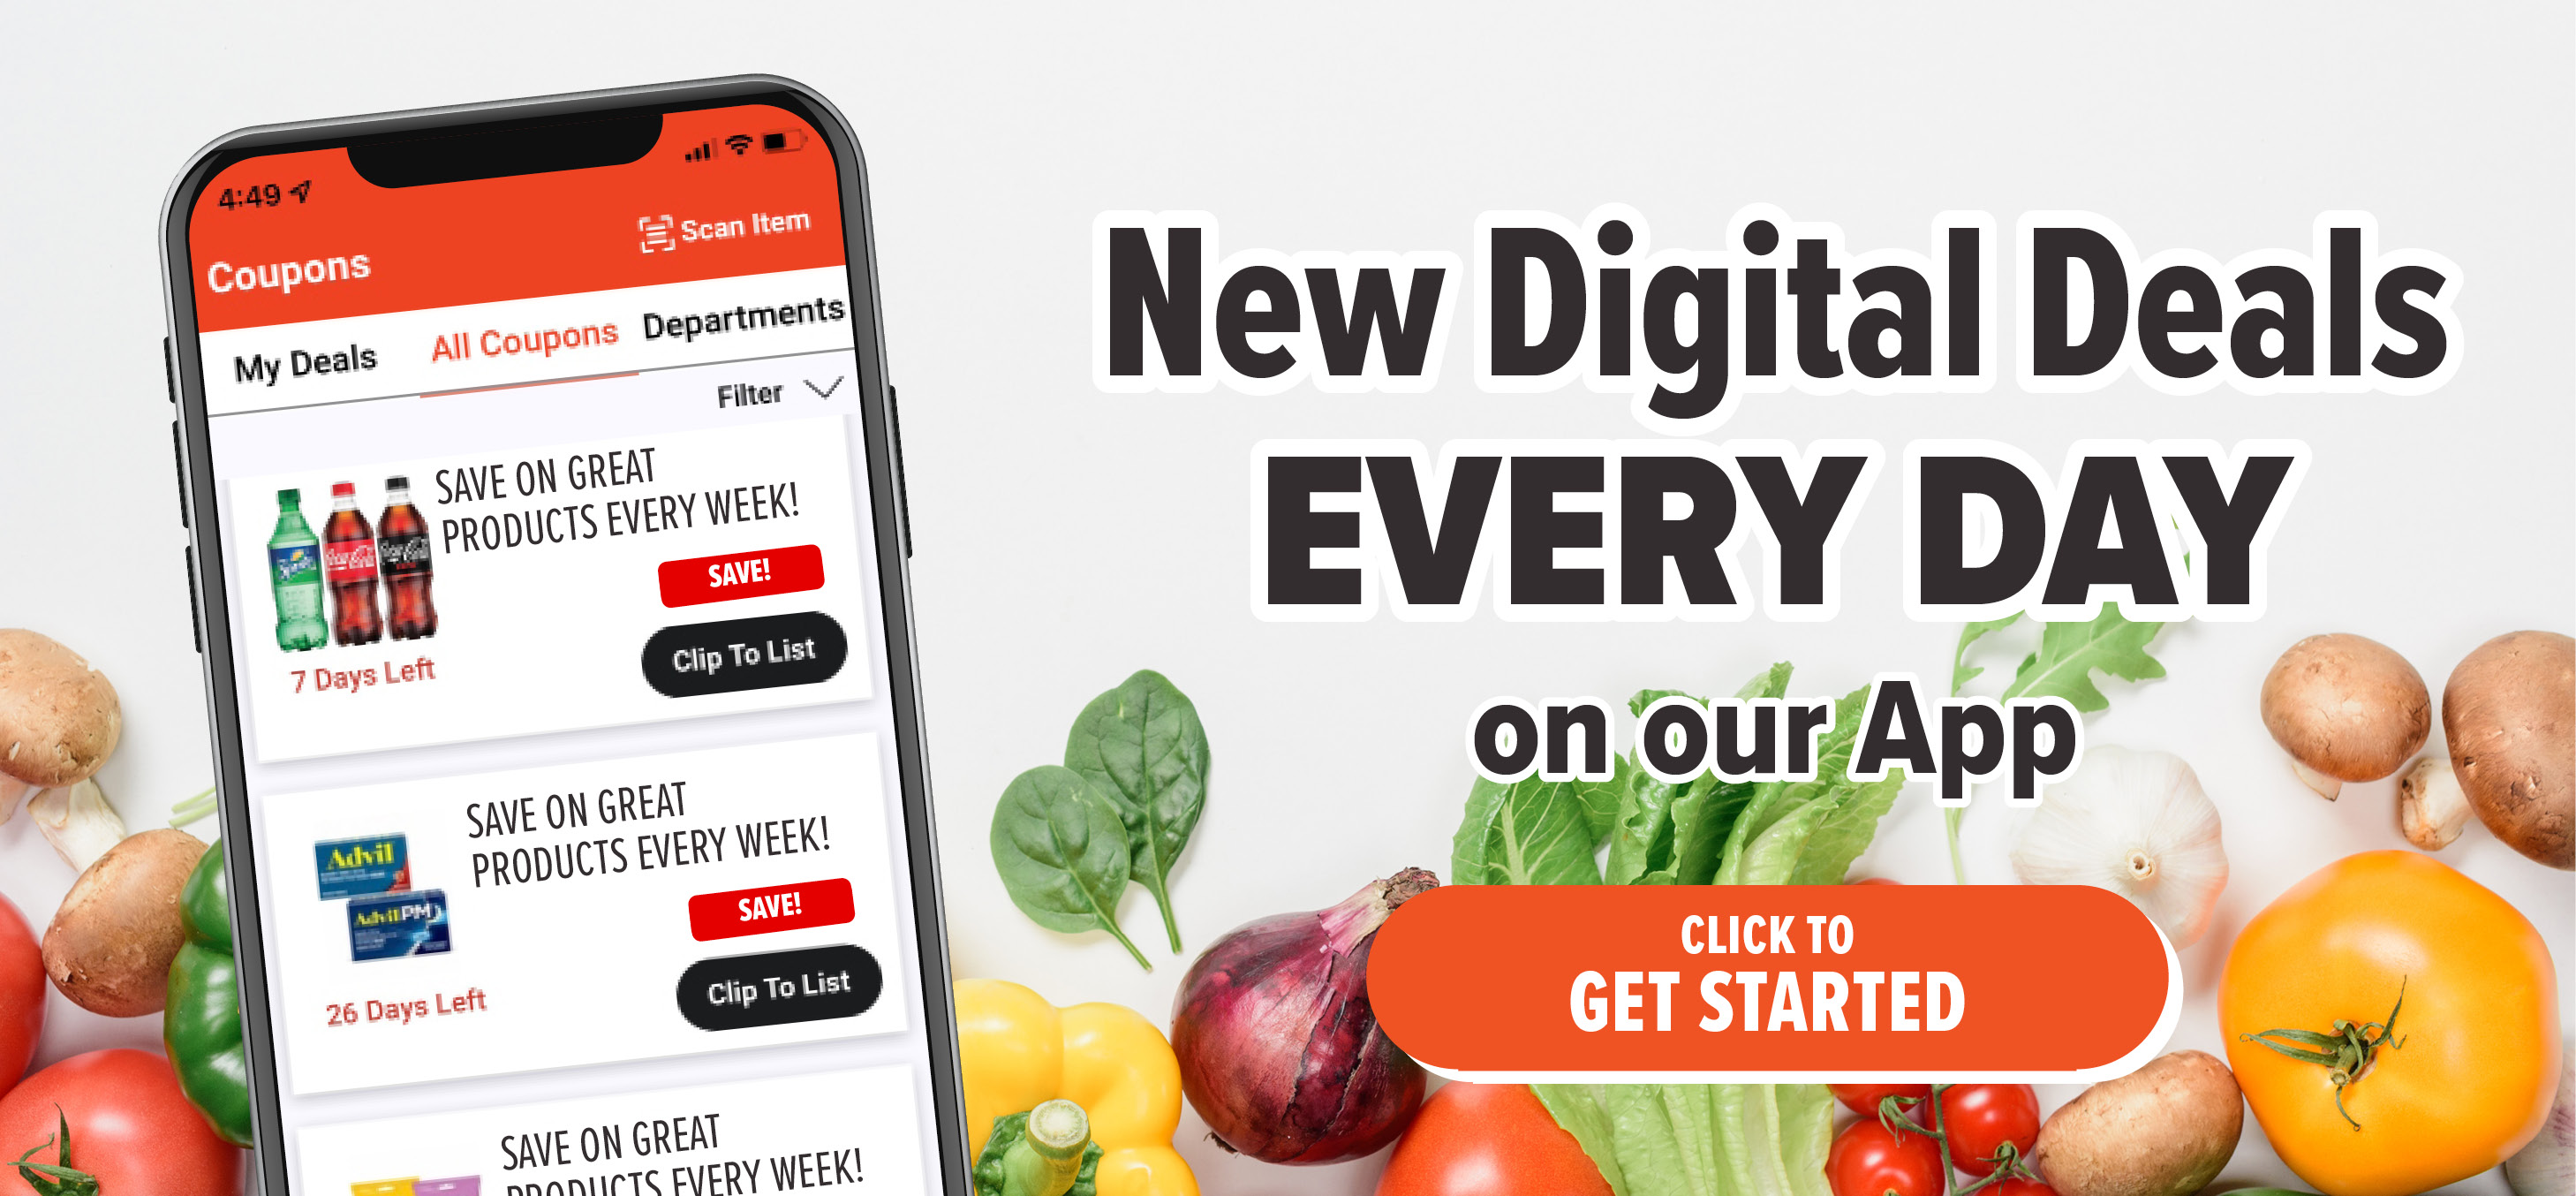 View Digital Coupons in our App